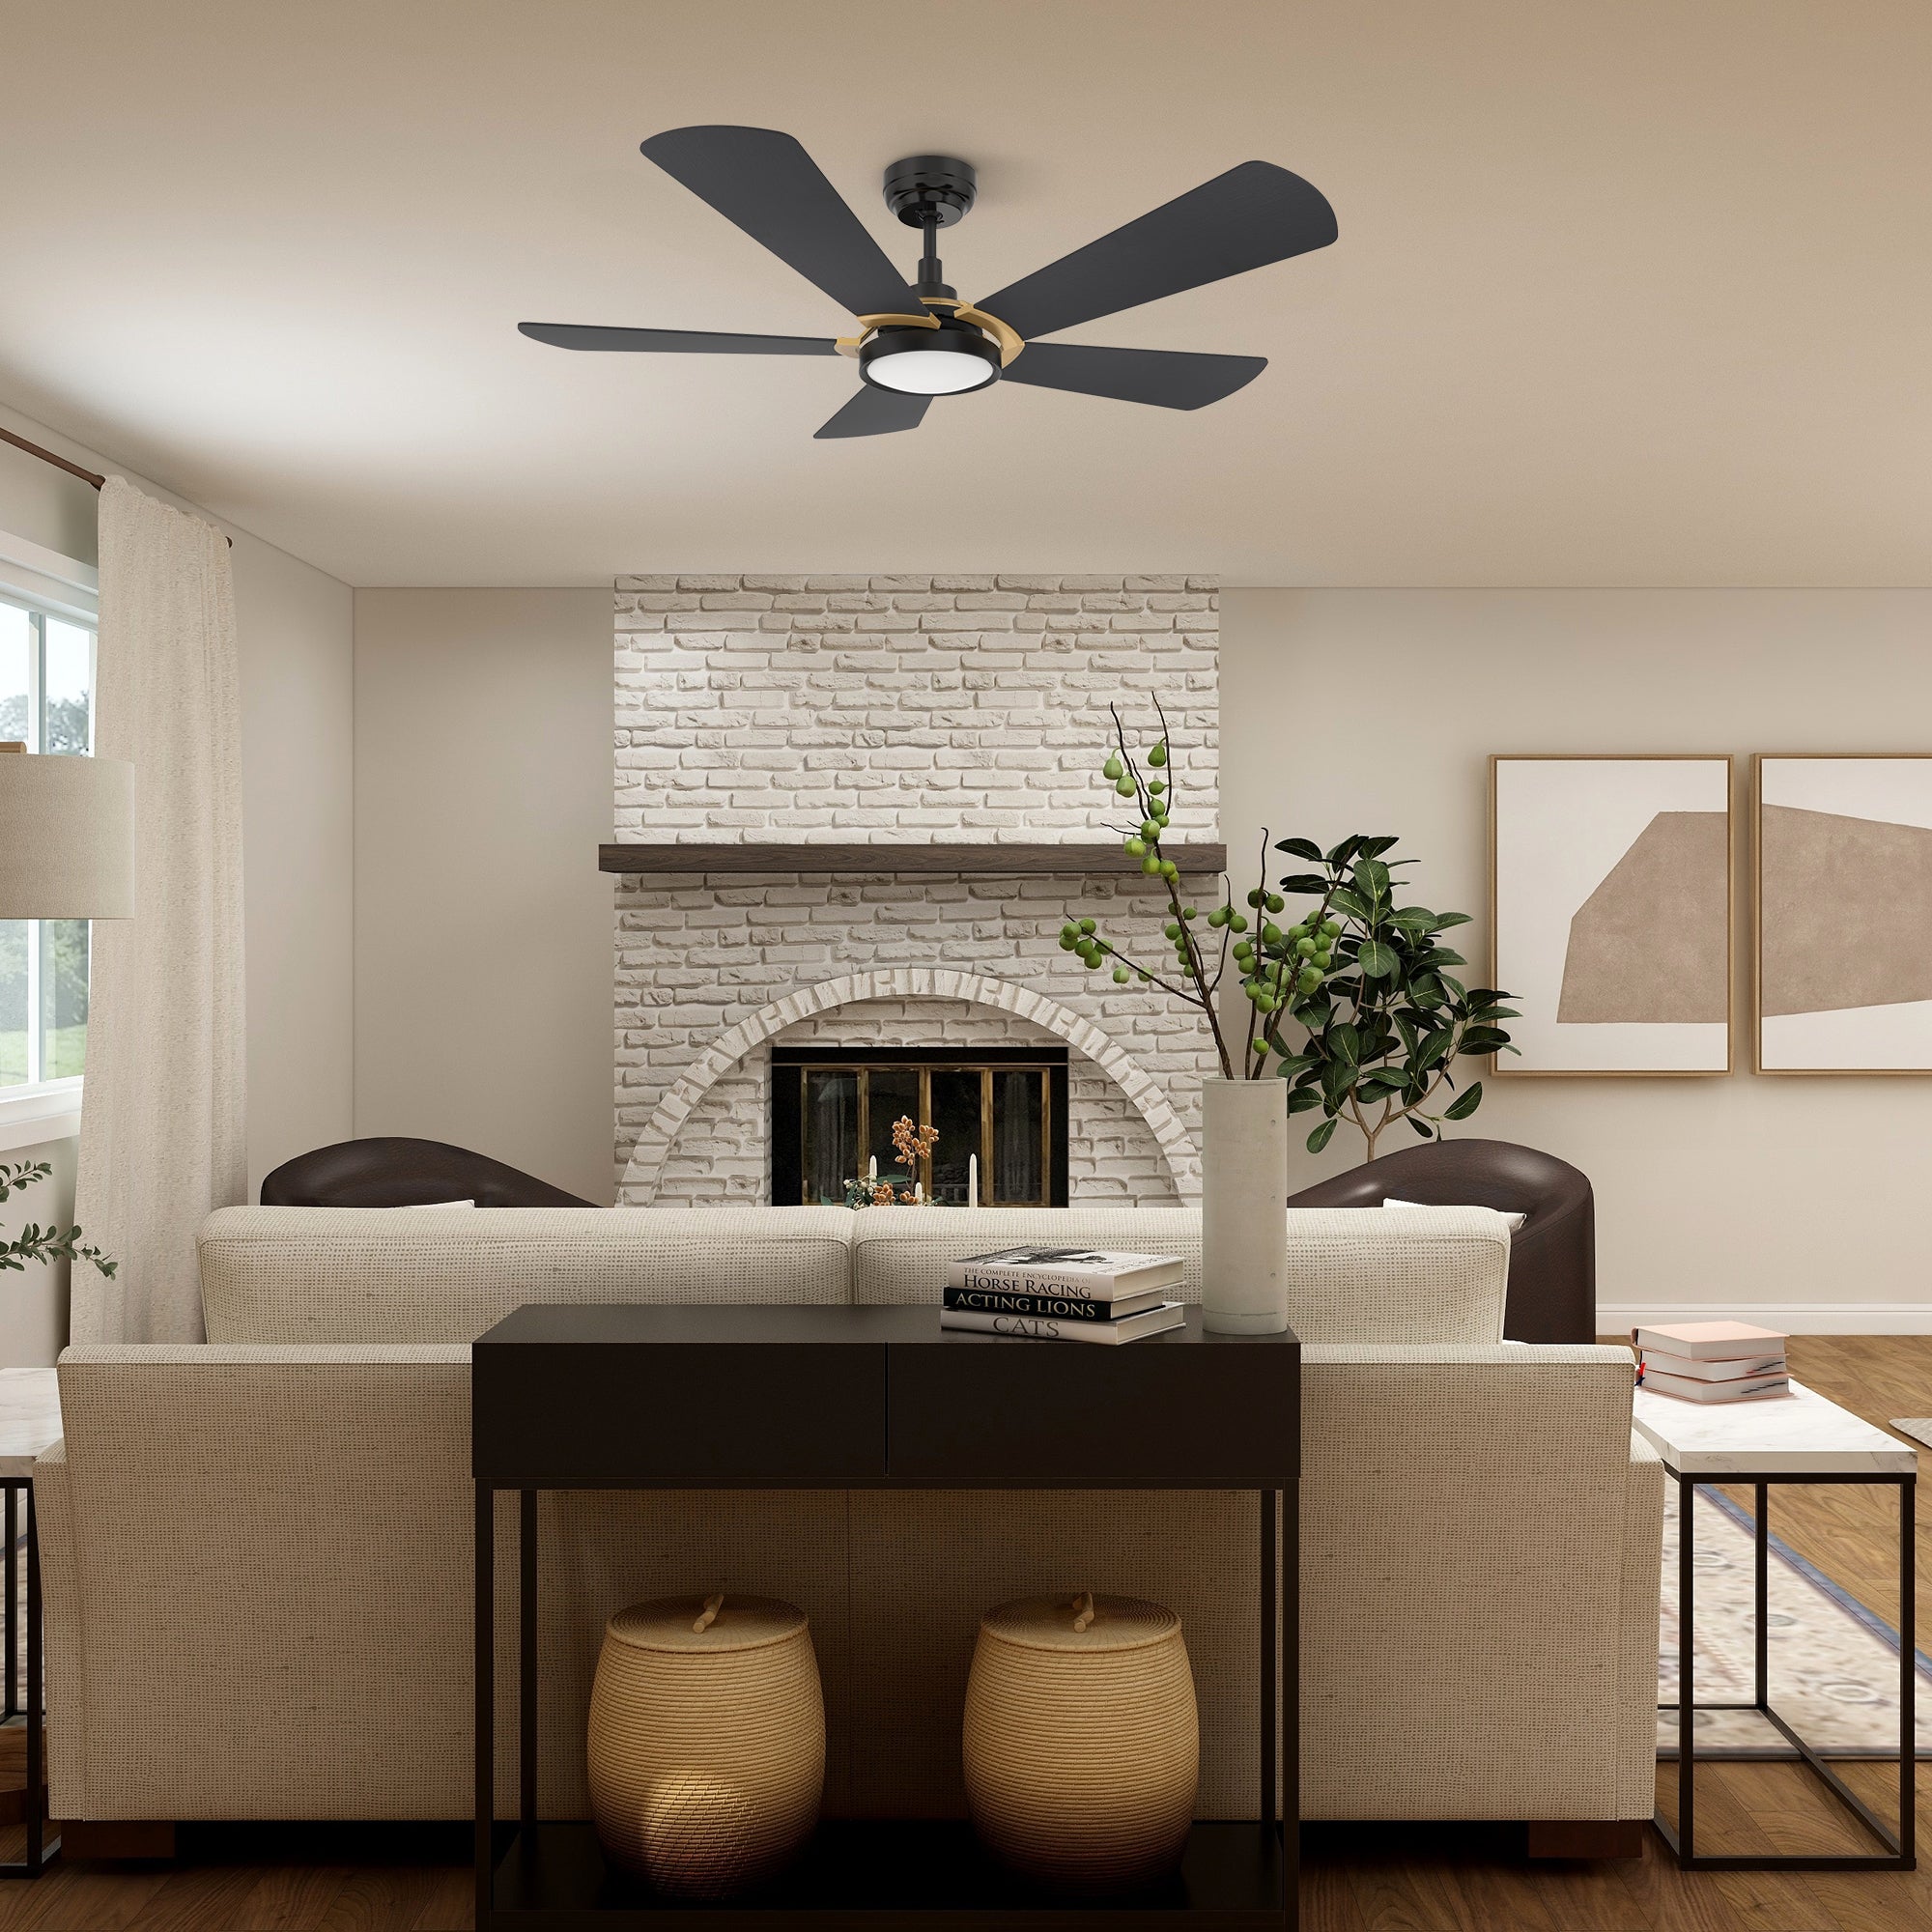 This Smafan Wilkes 56'' smart ceiling fan keeps your space cool, bright, and stylish. It is a soft modern masterpiece perfect for your large indoor living spaces. This Wifi smart ceiling fan is a simplicity designing with Black finish, use elegant Plywood blades, Glass shade and has an integrated 4000K LED daylight. The fan features Remote control, Wi-Fi apps, Siri Shortcut and Voice control technology (compatible with Amazon Alexa and Google Home Assistant ) to set fan preferences.